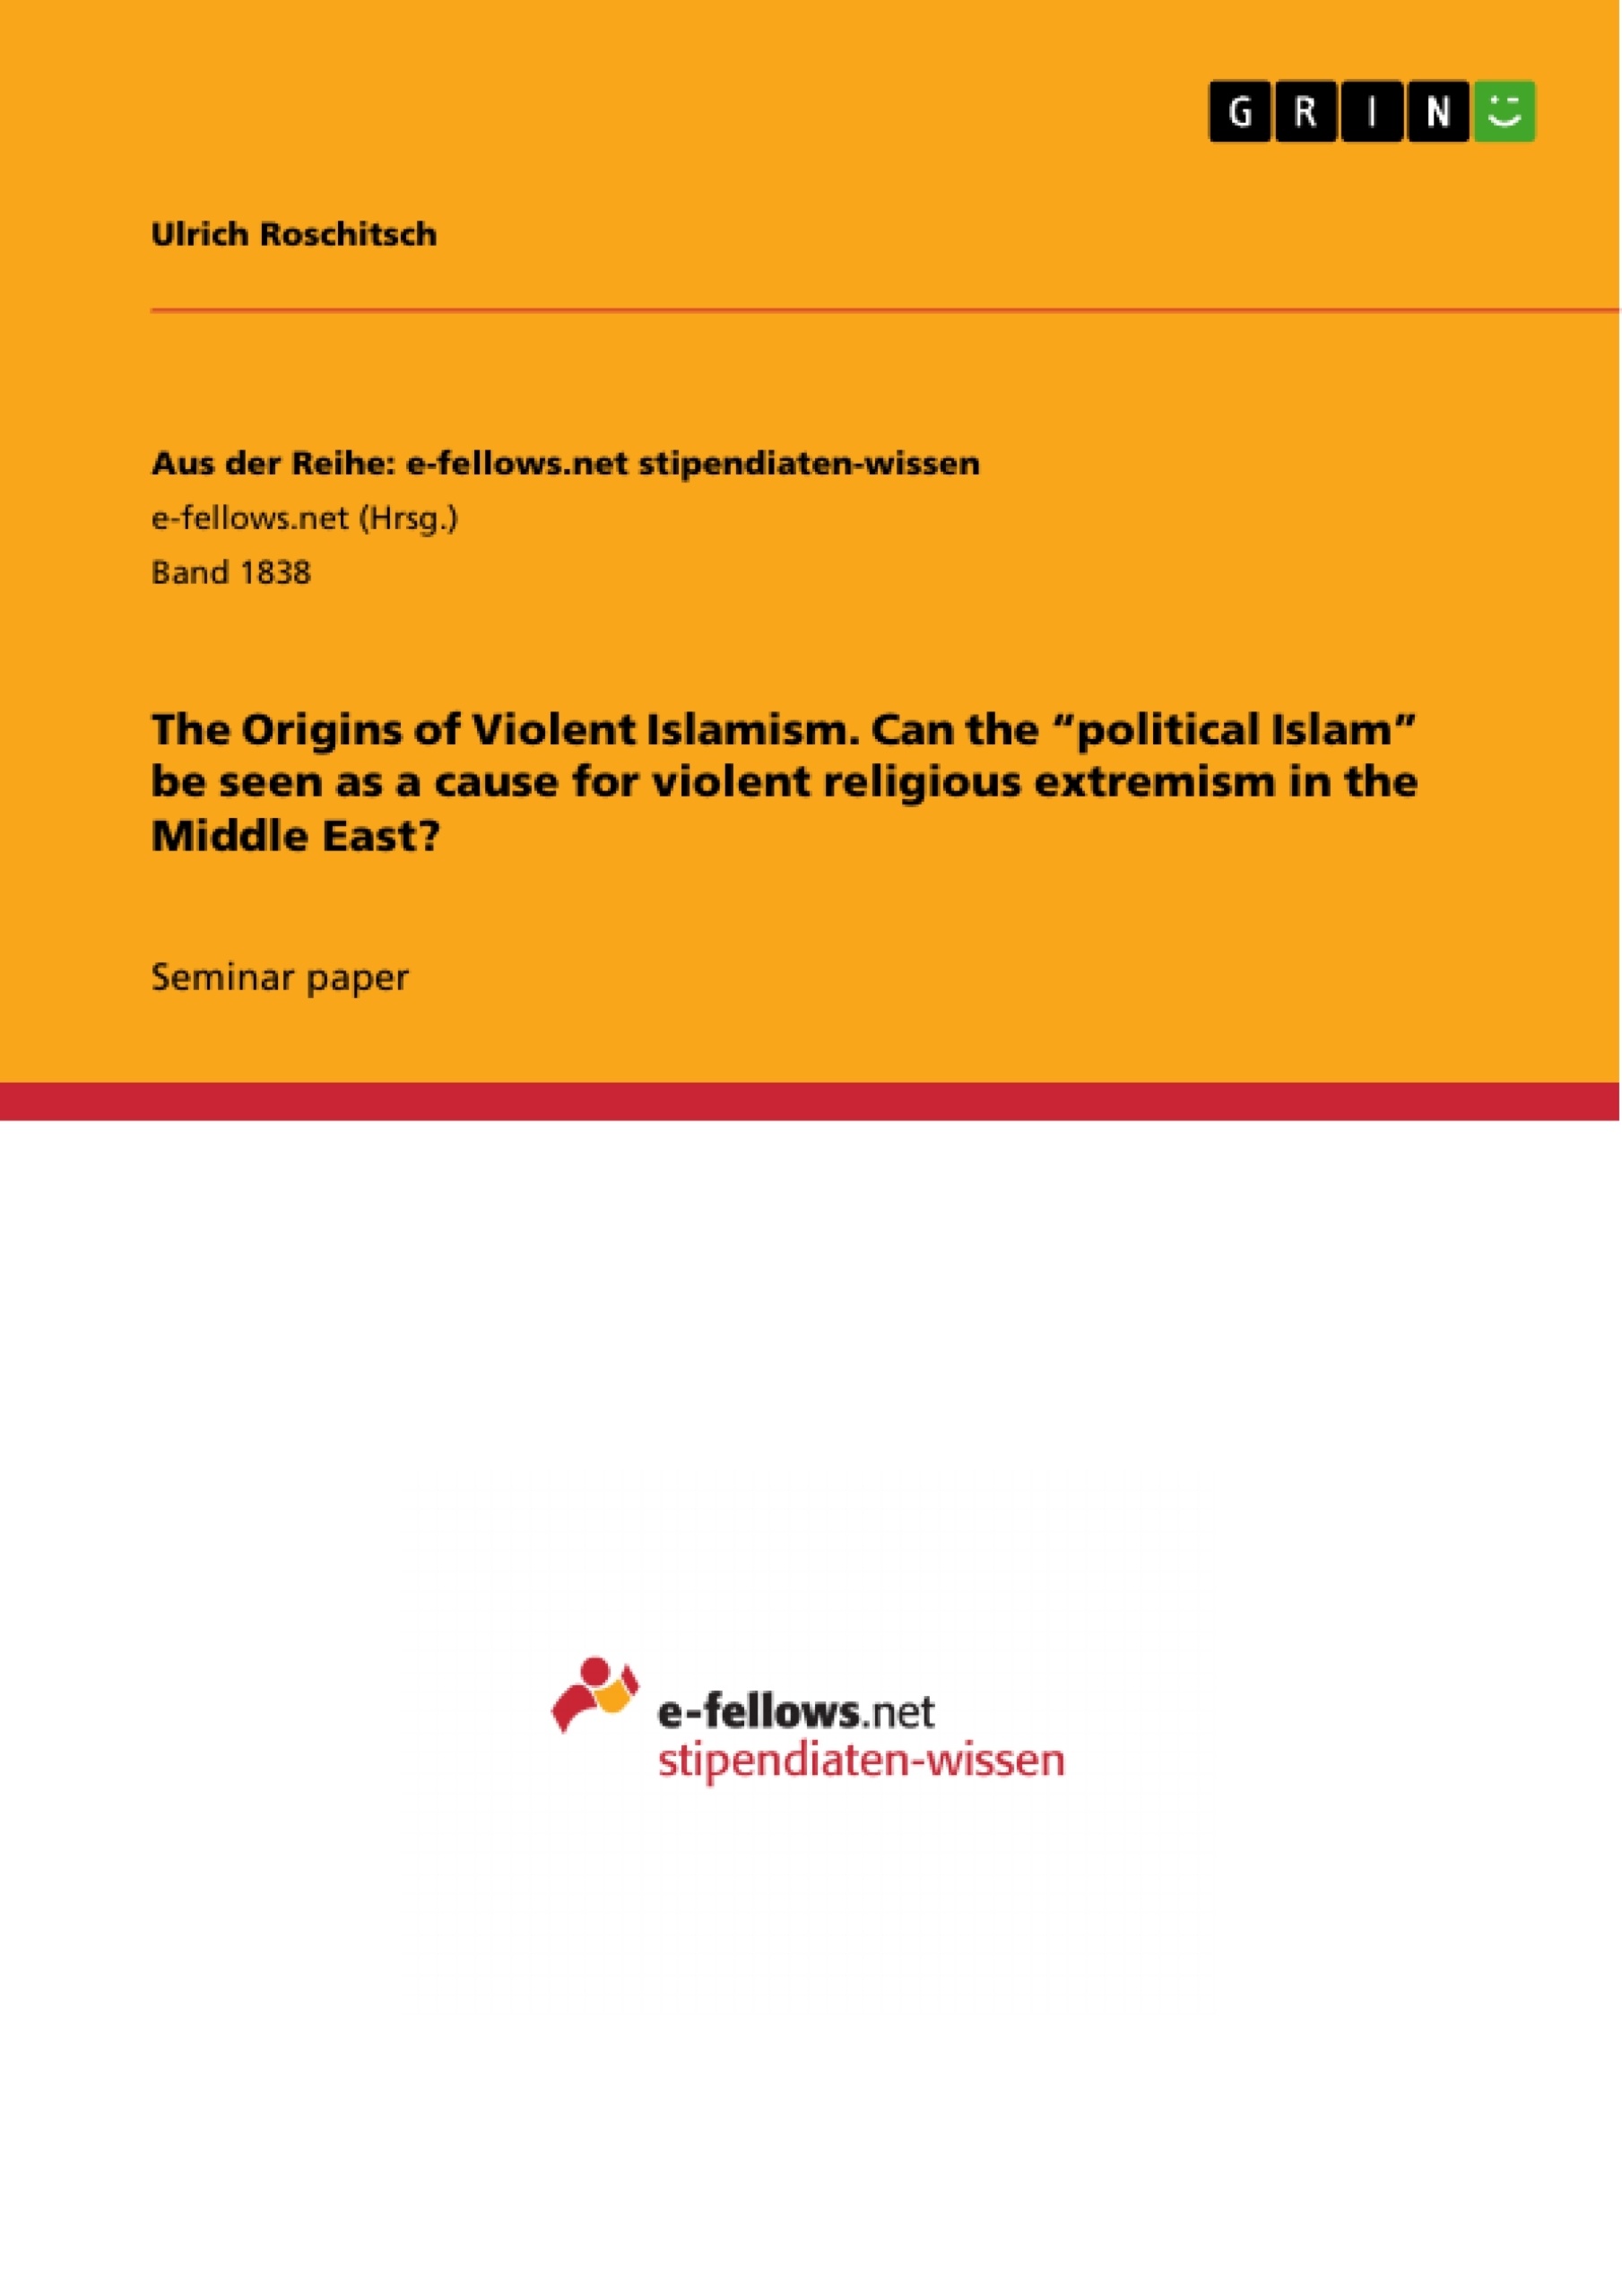 Title: The Origins of Violent Islamism. Can the “political Islam” be seen as a cause for violent religious extremism in the Middle East?